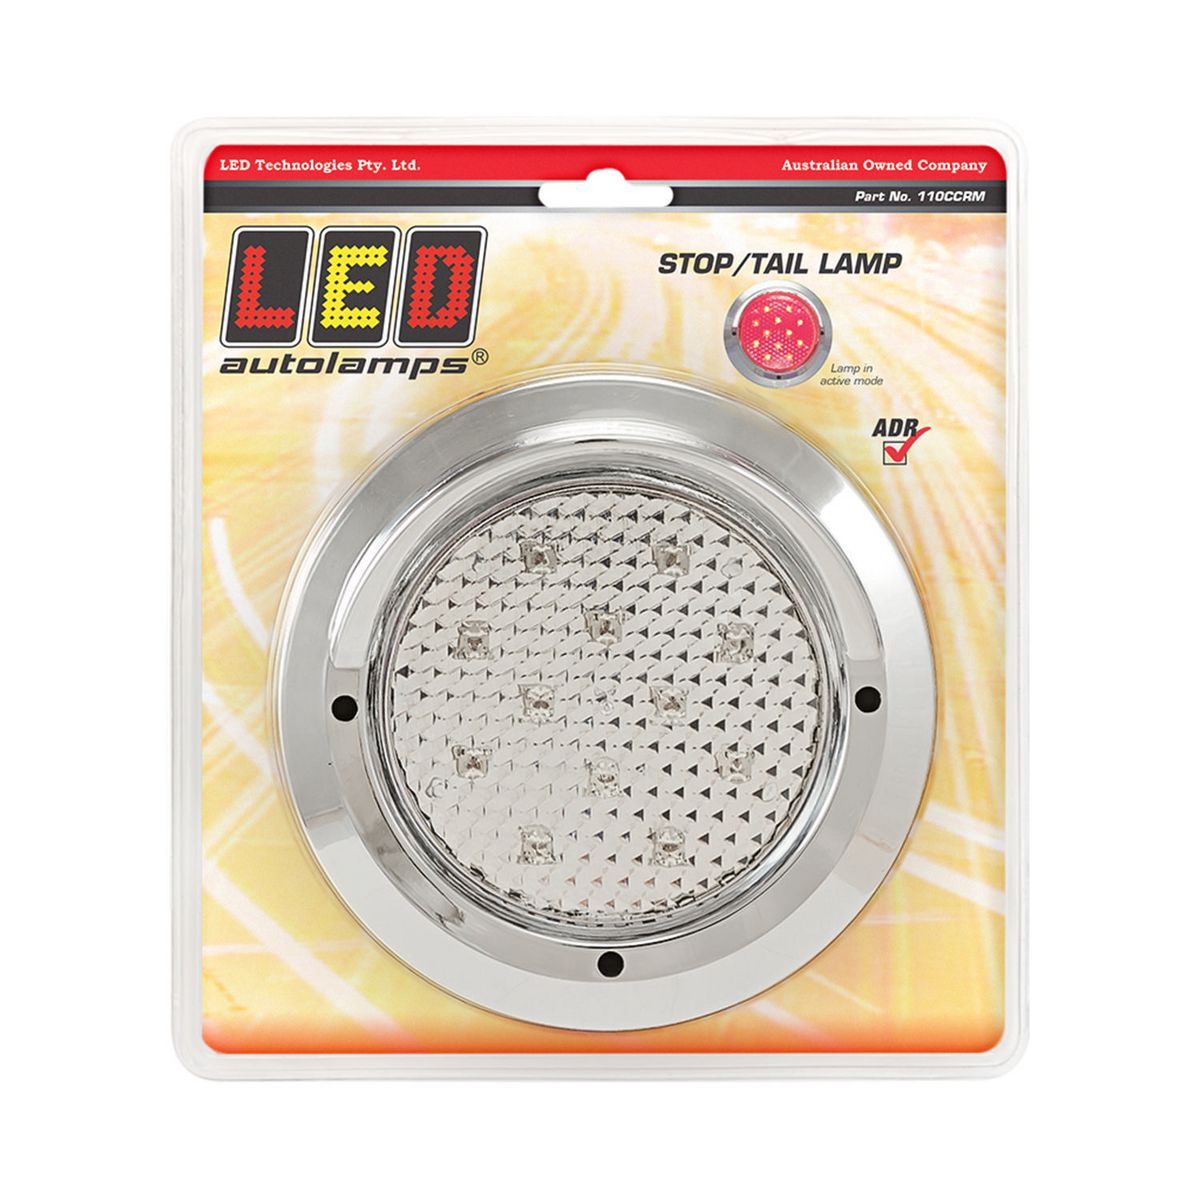 CHROME SERIES : MULTI 12-24VOLT STOP/TAIL LAMP 12 LEDS 148MM ROUND X 80MM INCLUDING GROMMET AND CHROME FLANGE.